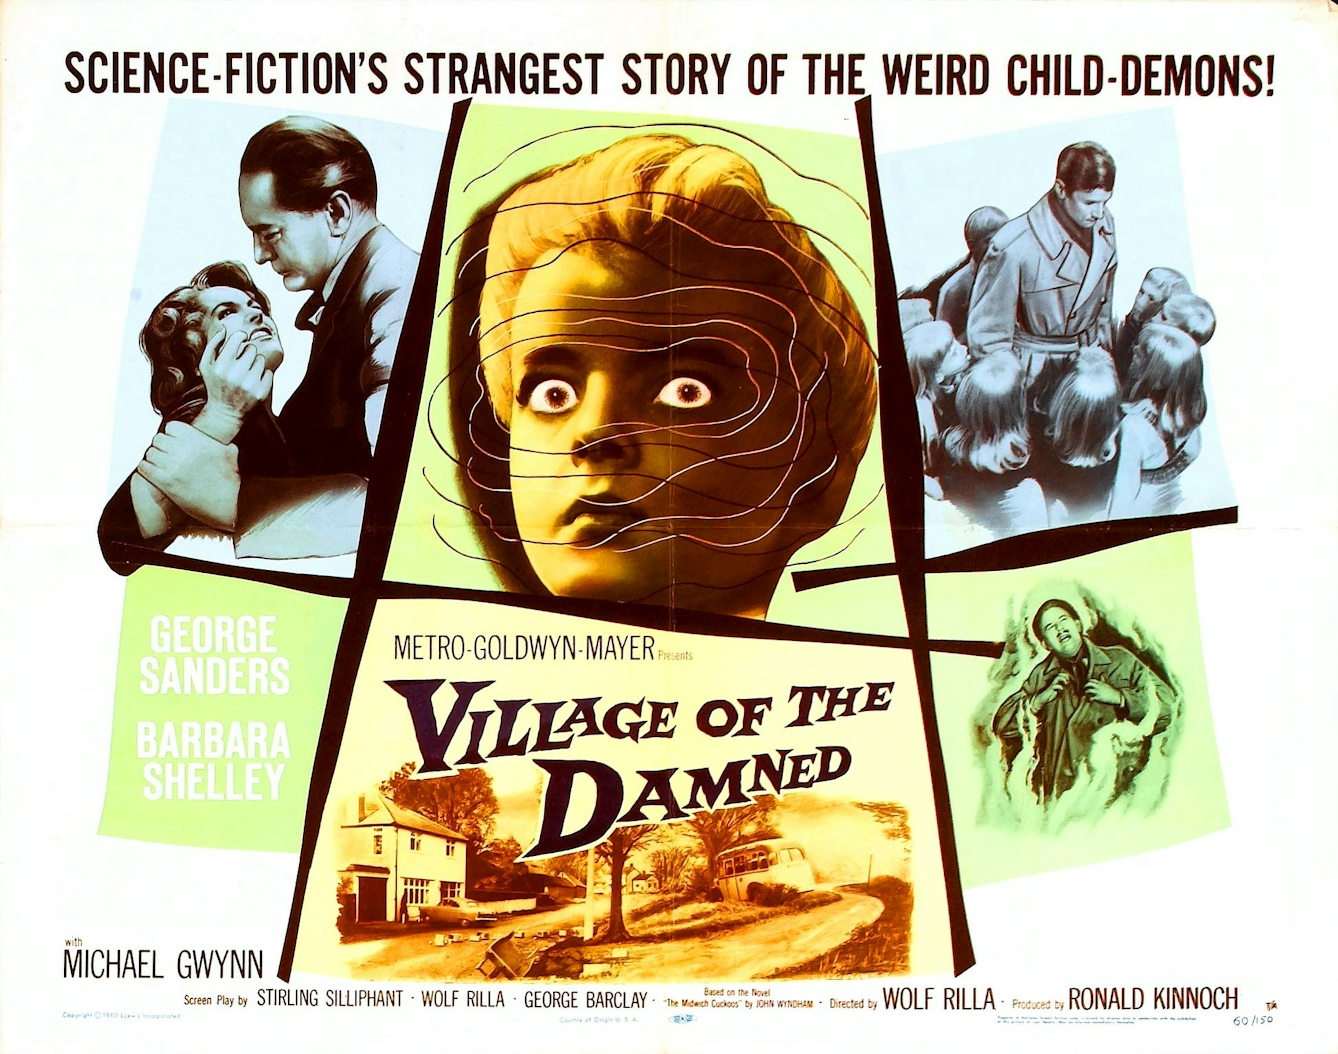 Film poster for 'Village of the Damned' centred on an eerie child with blond hair and glowing eyes.